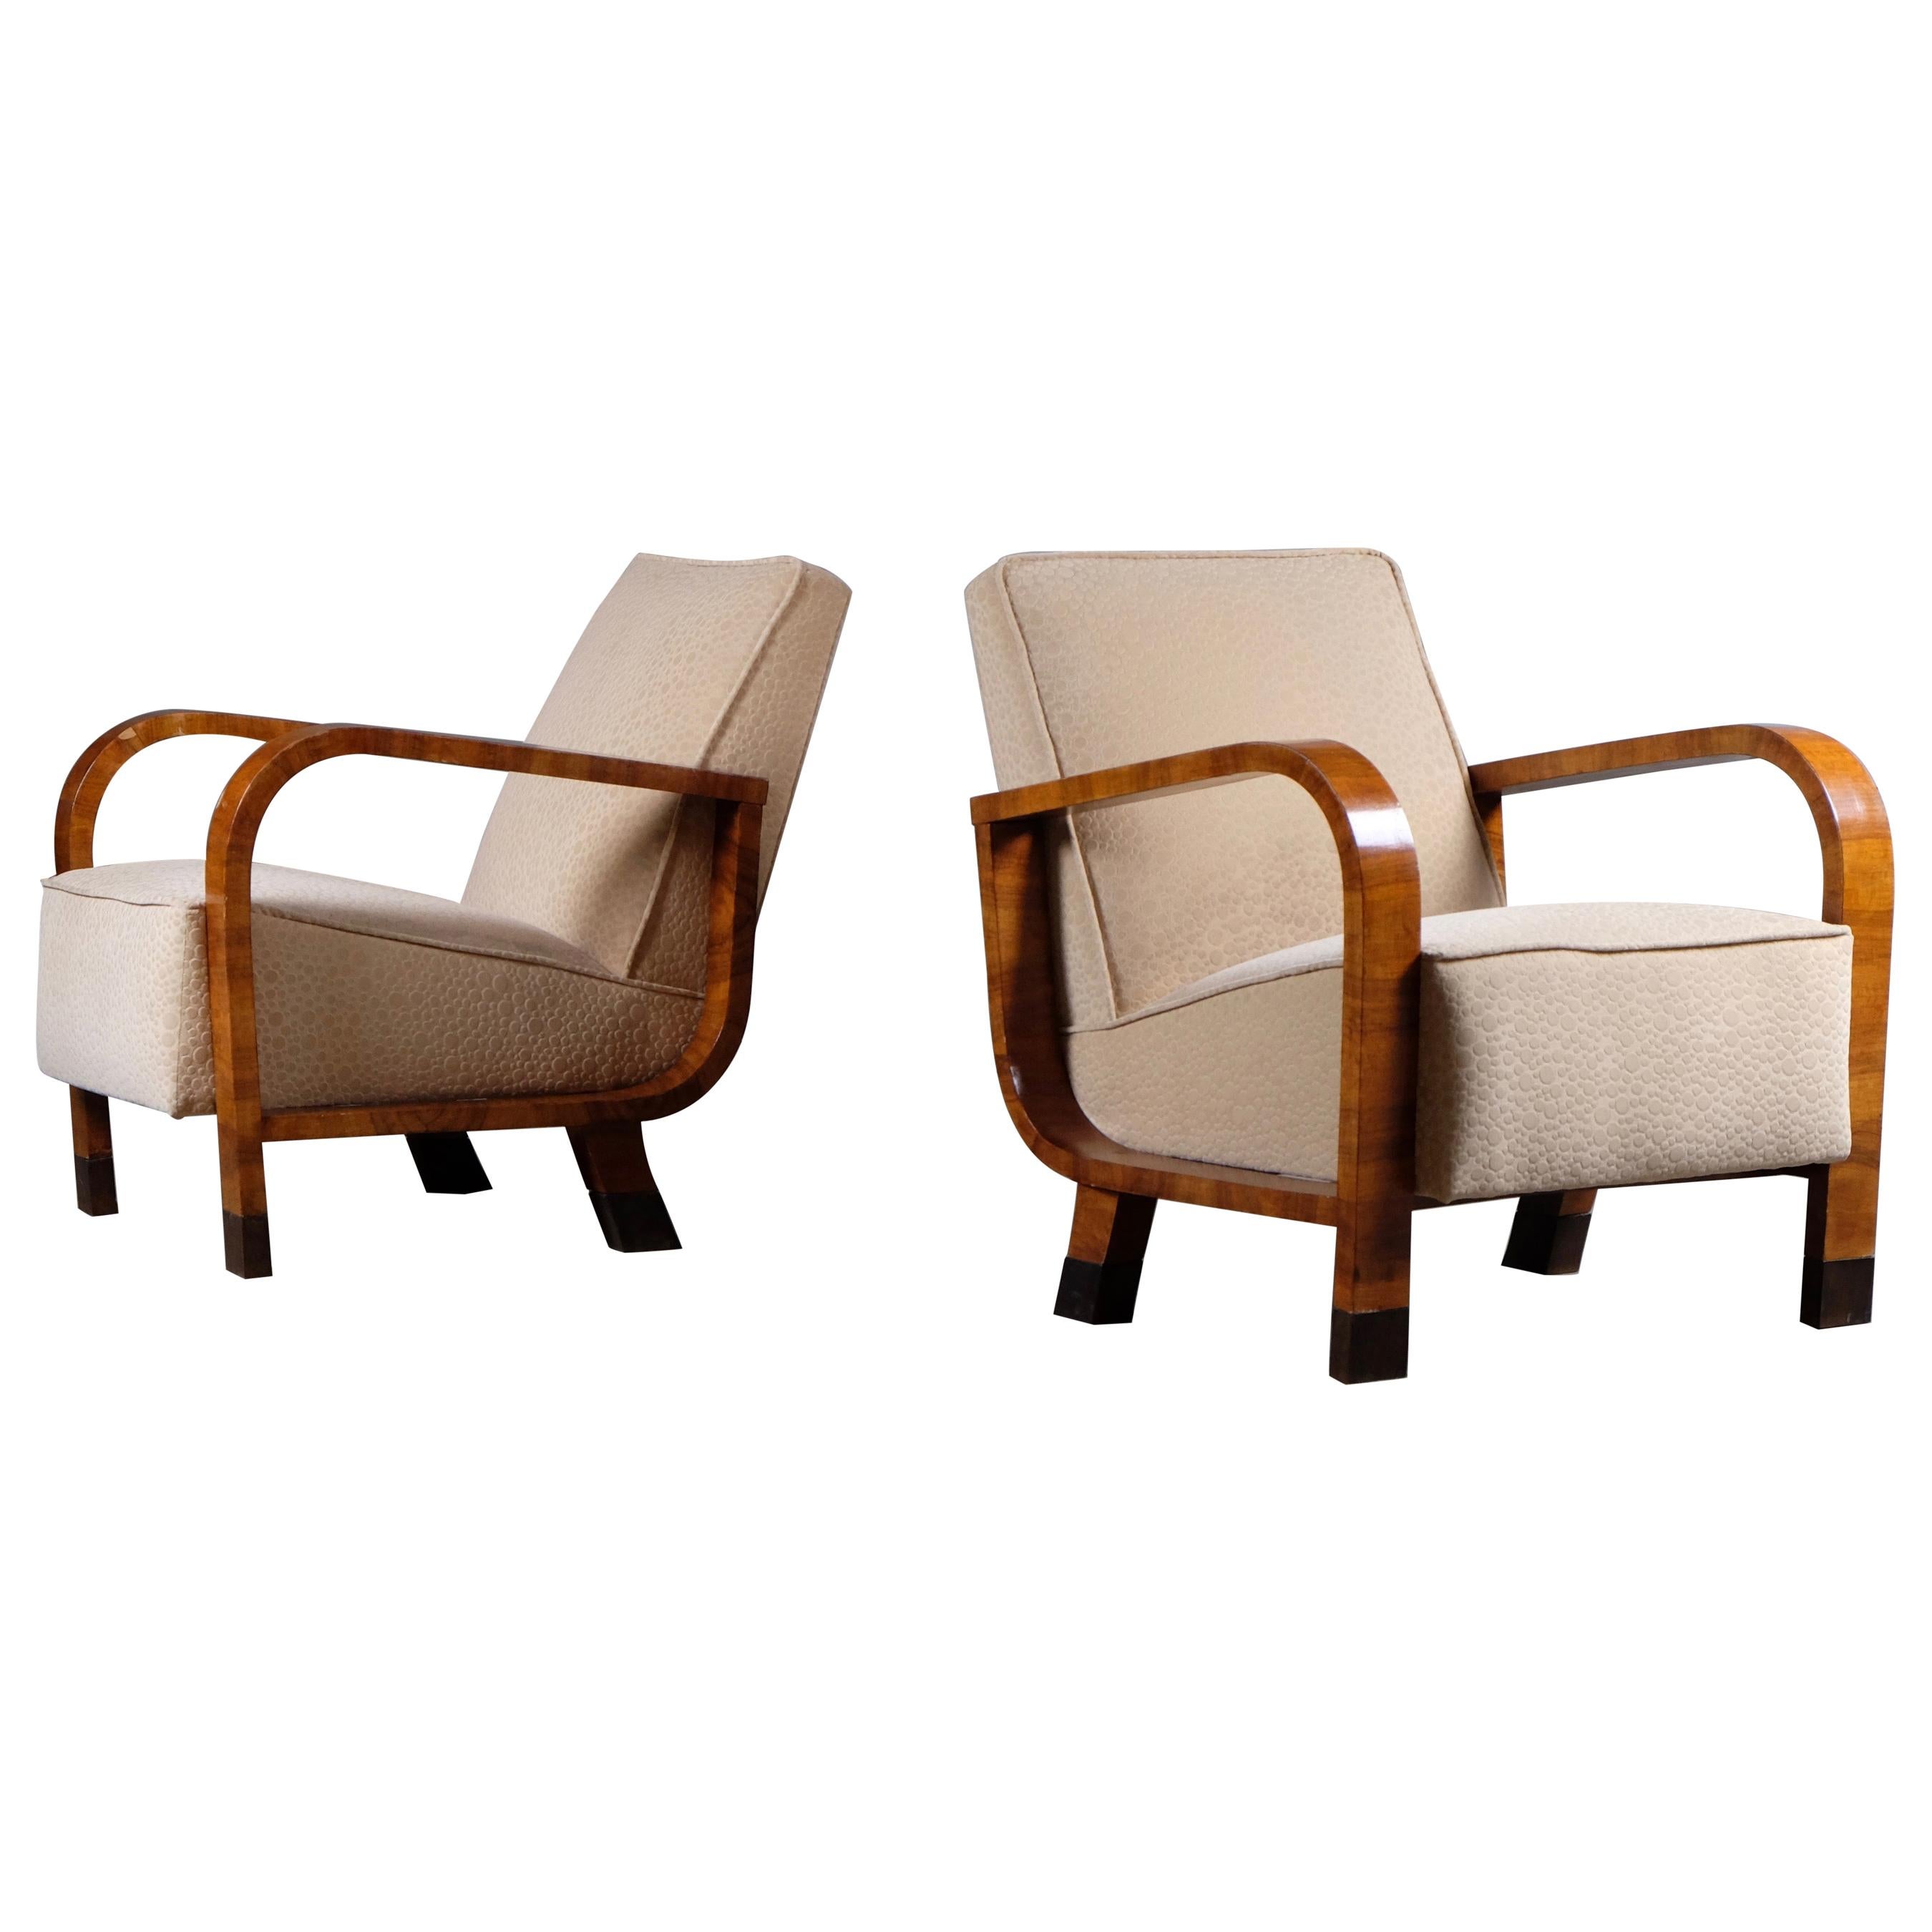 Pair of French Art Deco Armchairs, 1930s